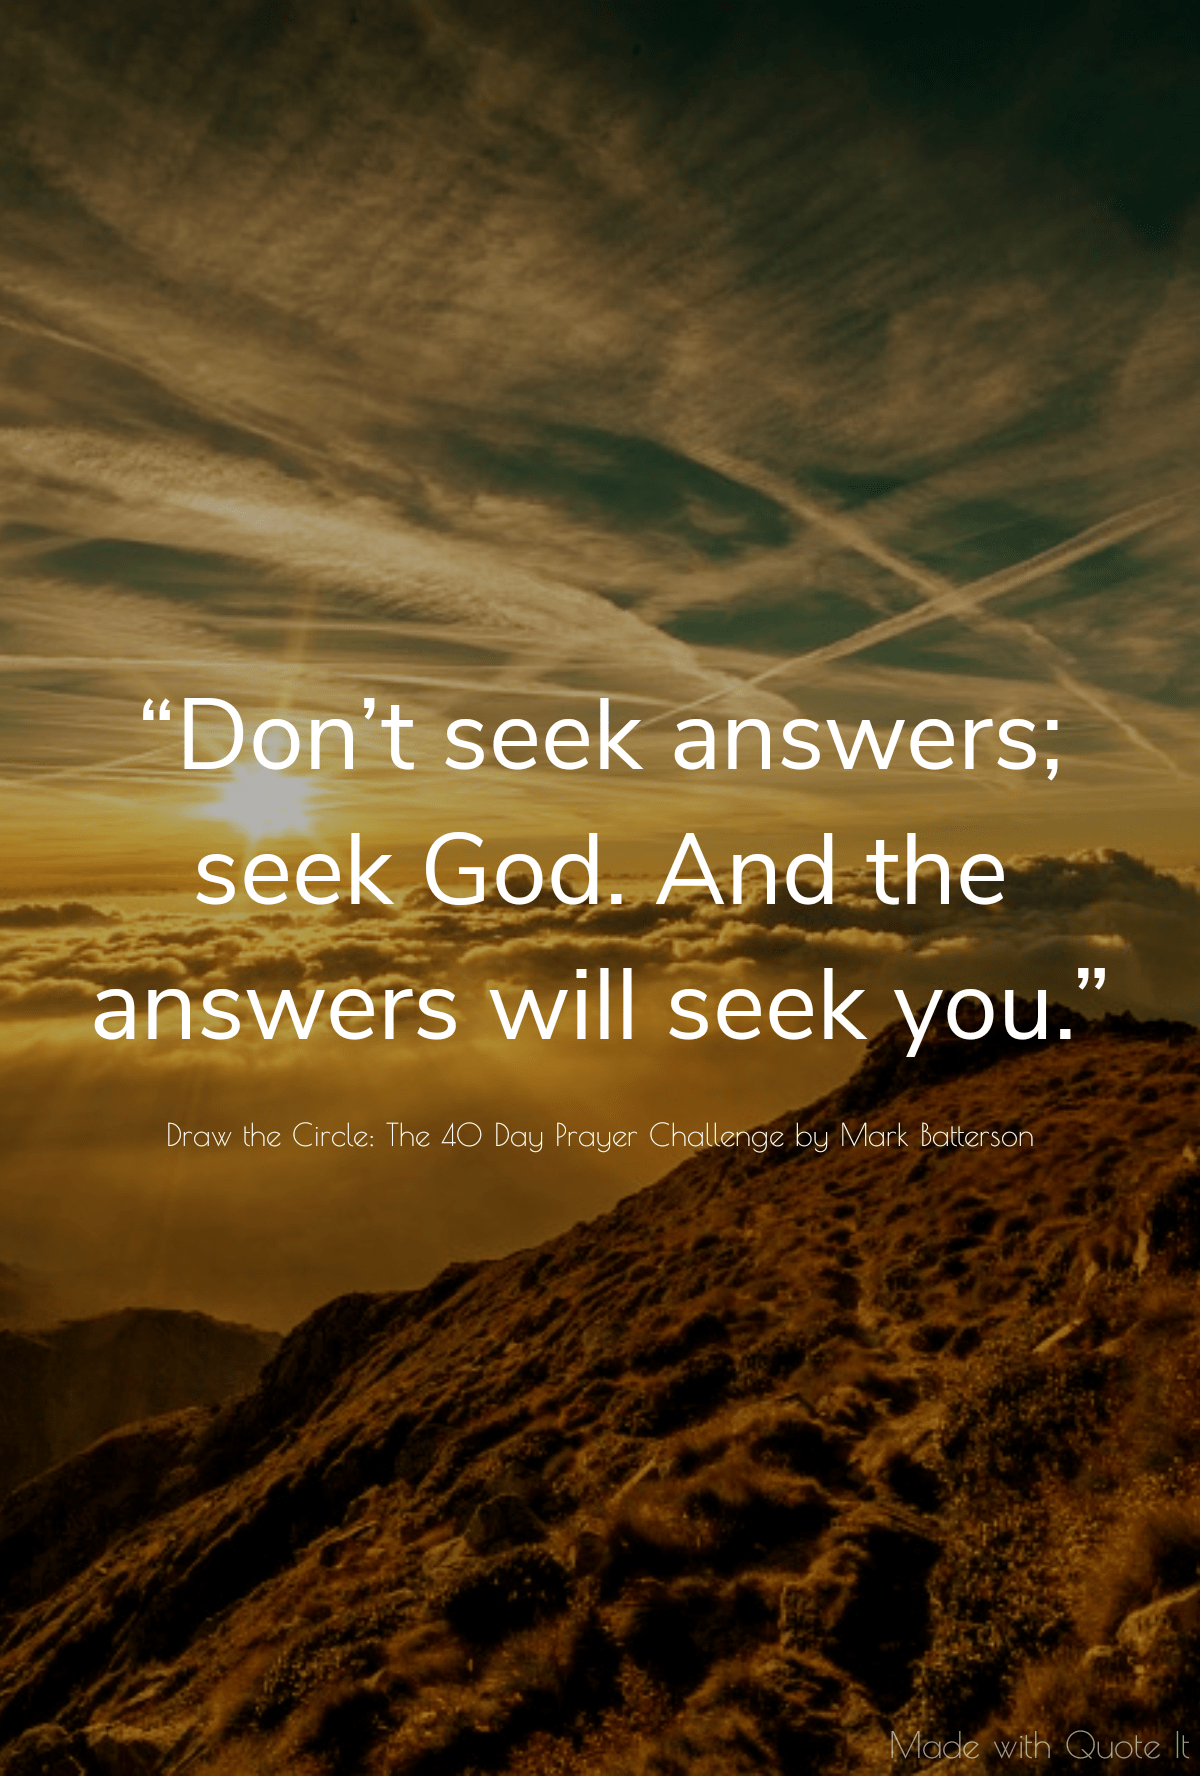 “Don’t seek answers; seek God. And the answers will seek you.” - Draw the Circle: The 40 Day Prayer Challenge by Mark Batterson